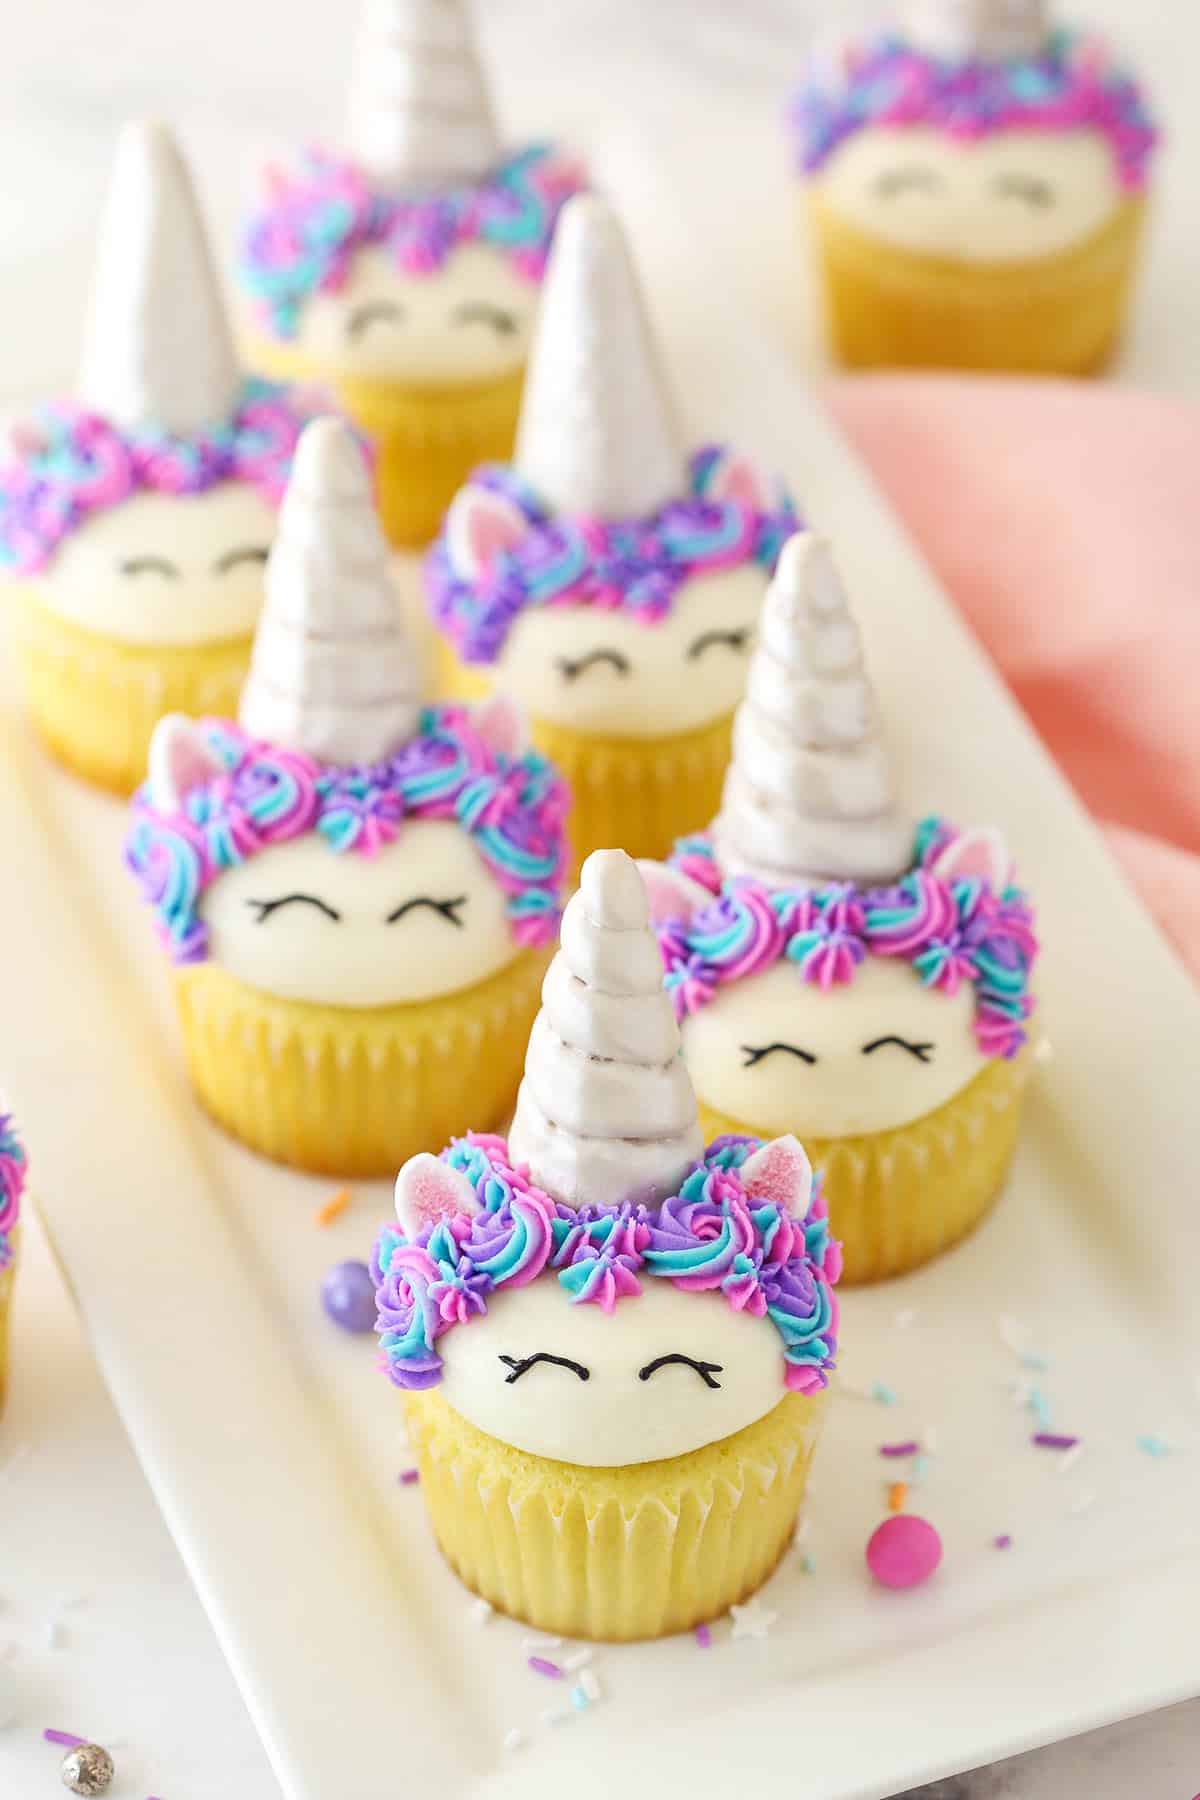 Mini Cupcake Set - For Small Hands